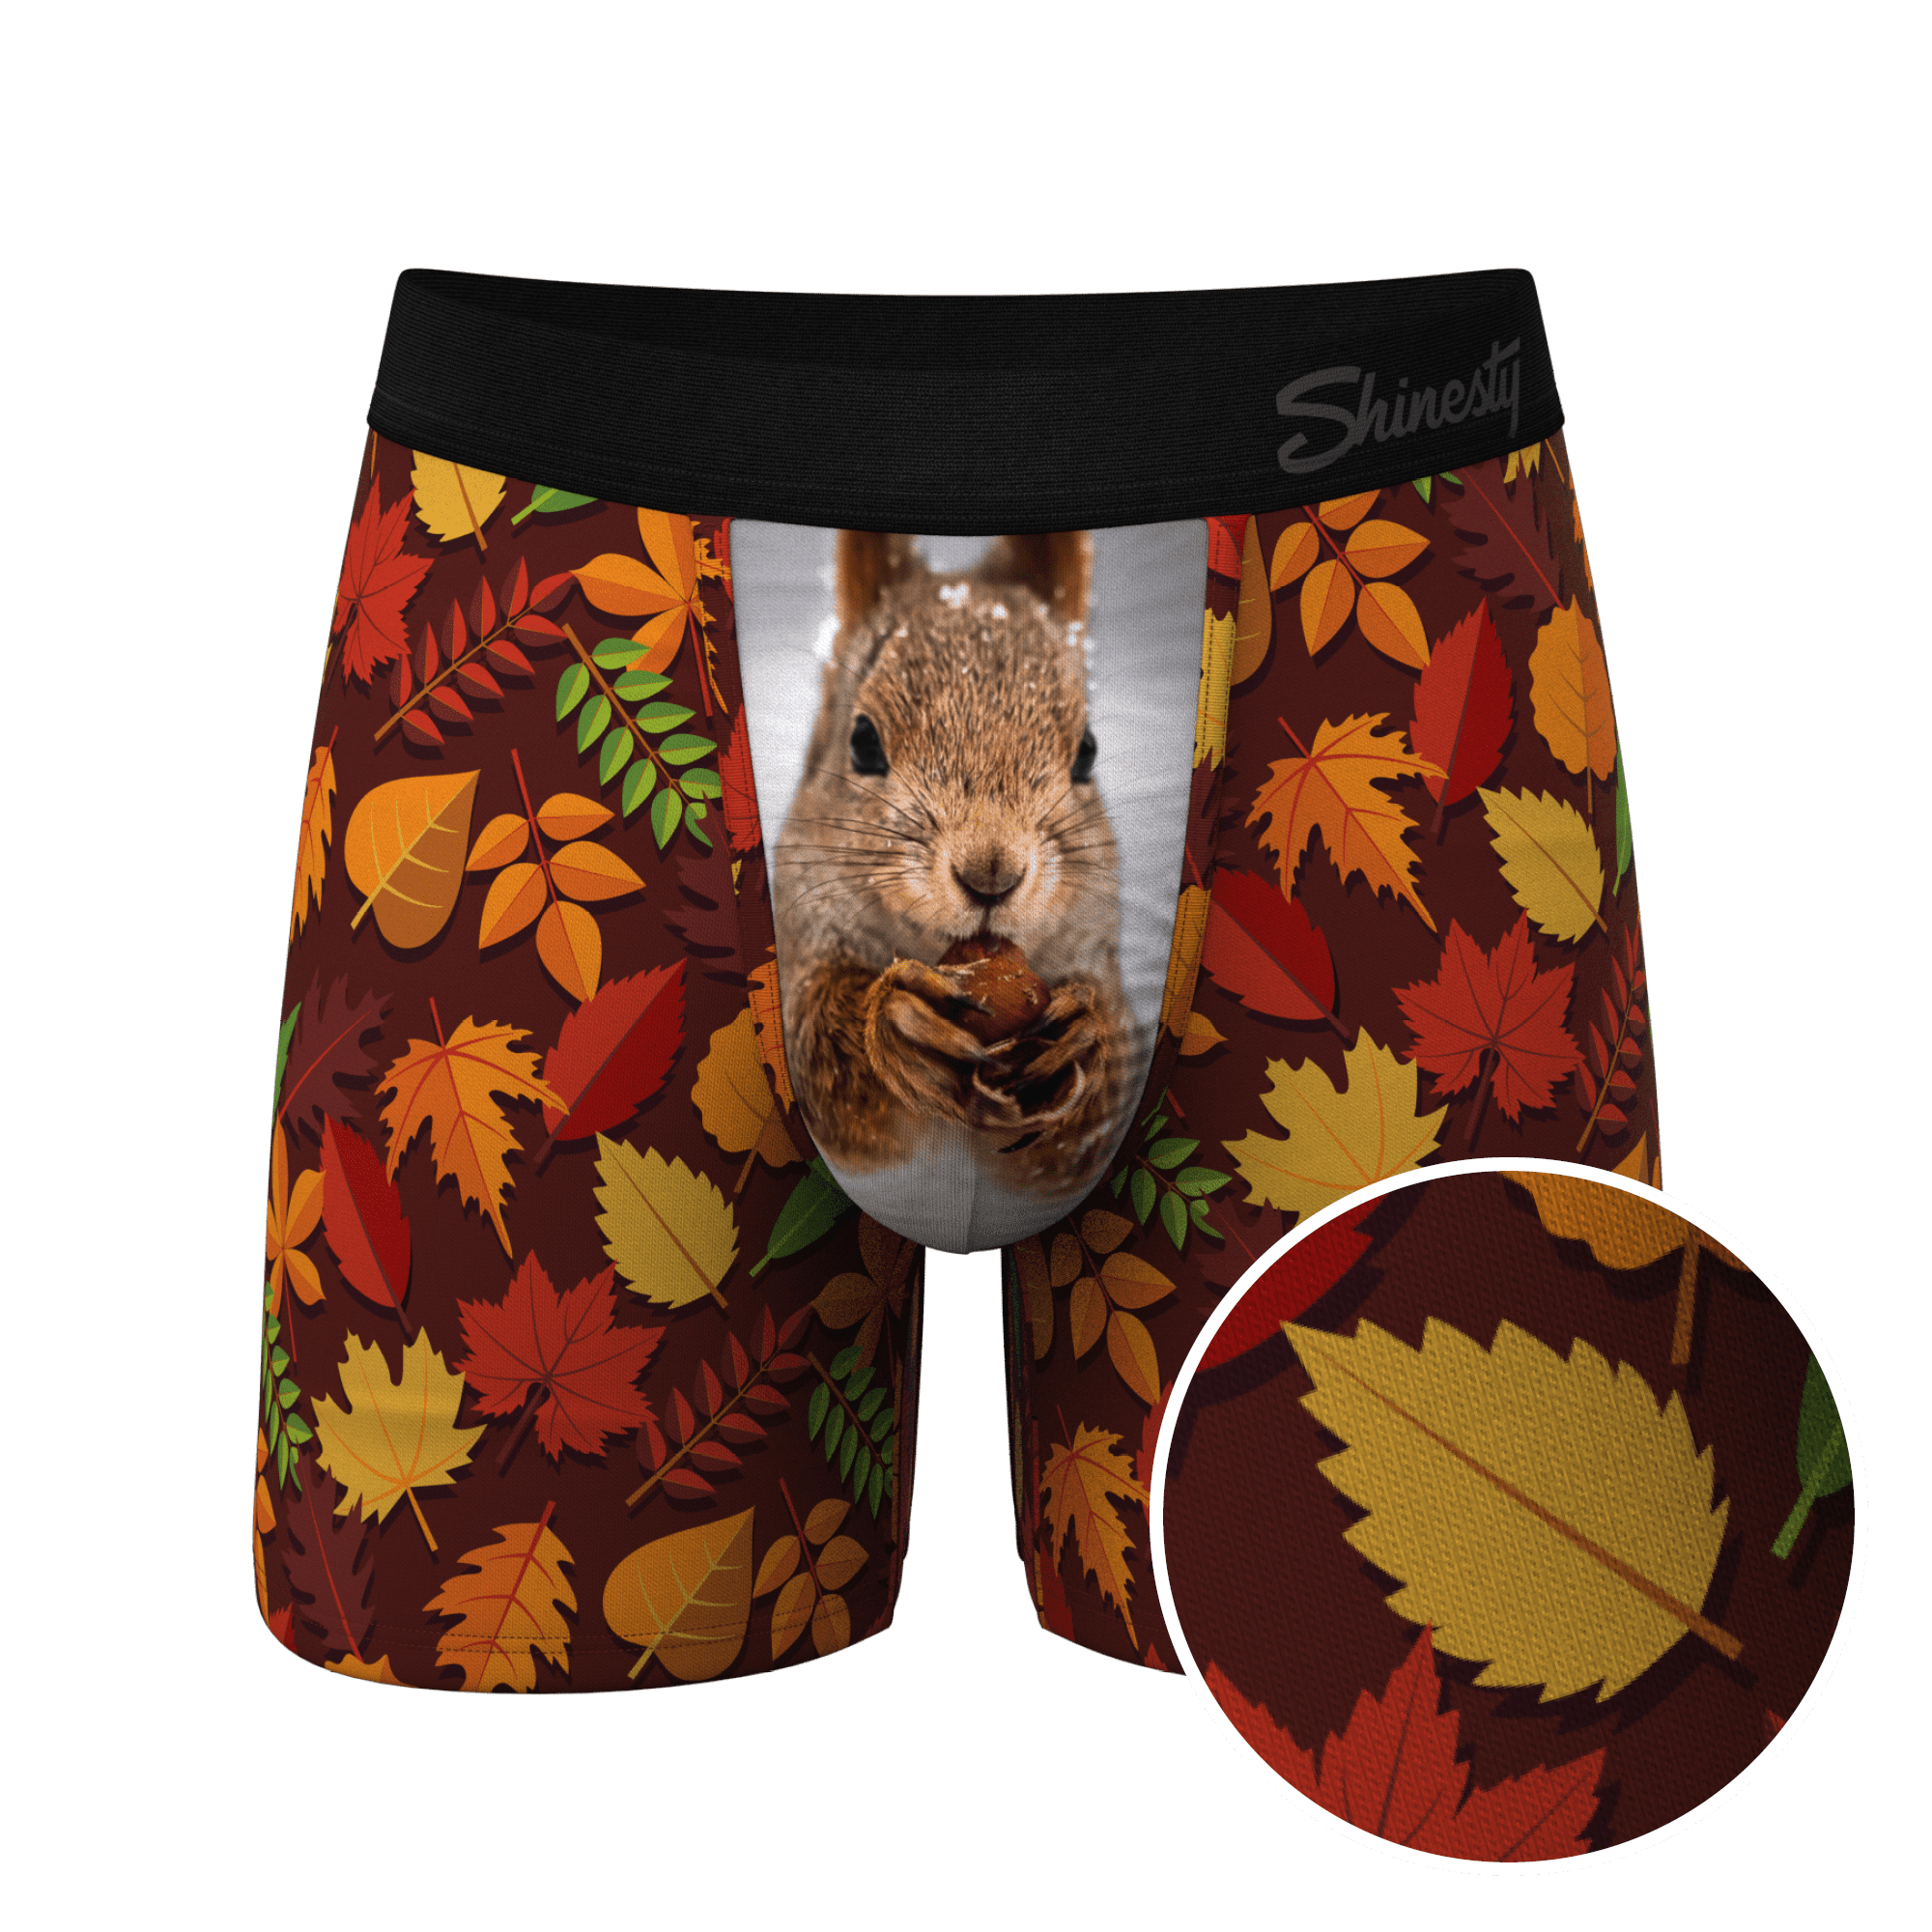 The Acorn Hoard - Shinesty Squirrel Ball Hammock Pouch Underwear With Fly  2X 